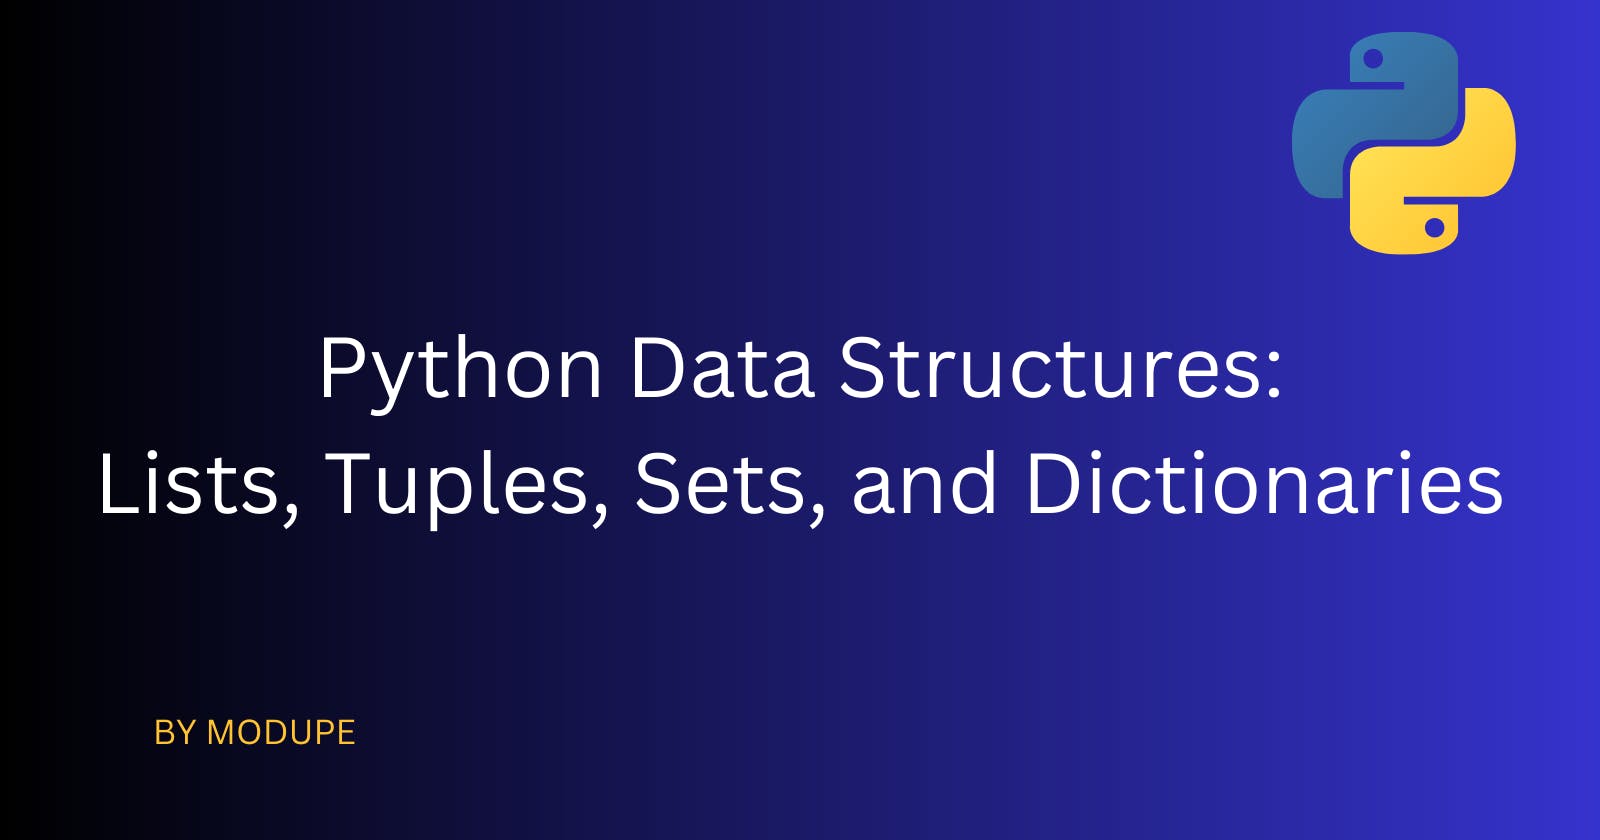 Python Data Structures: Lists, Tuples, Sets, and Dictionaries